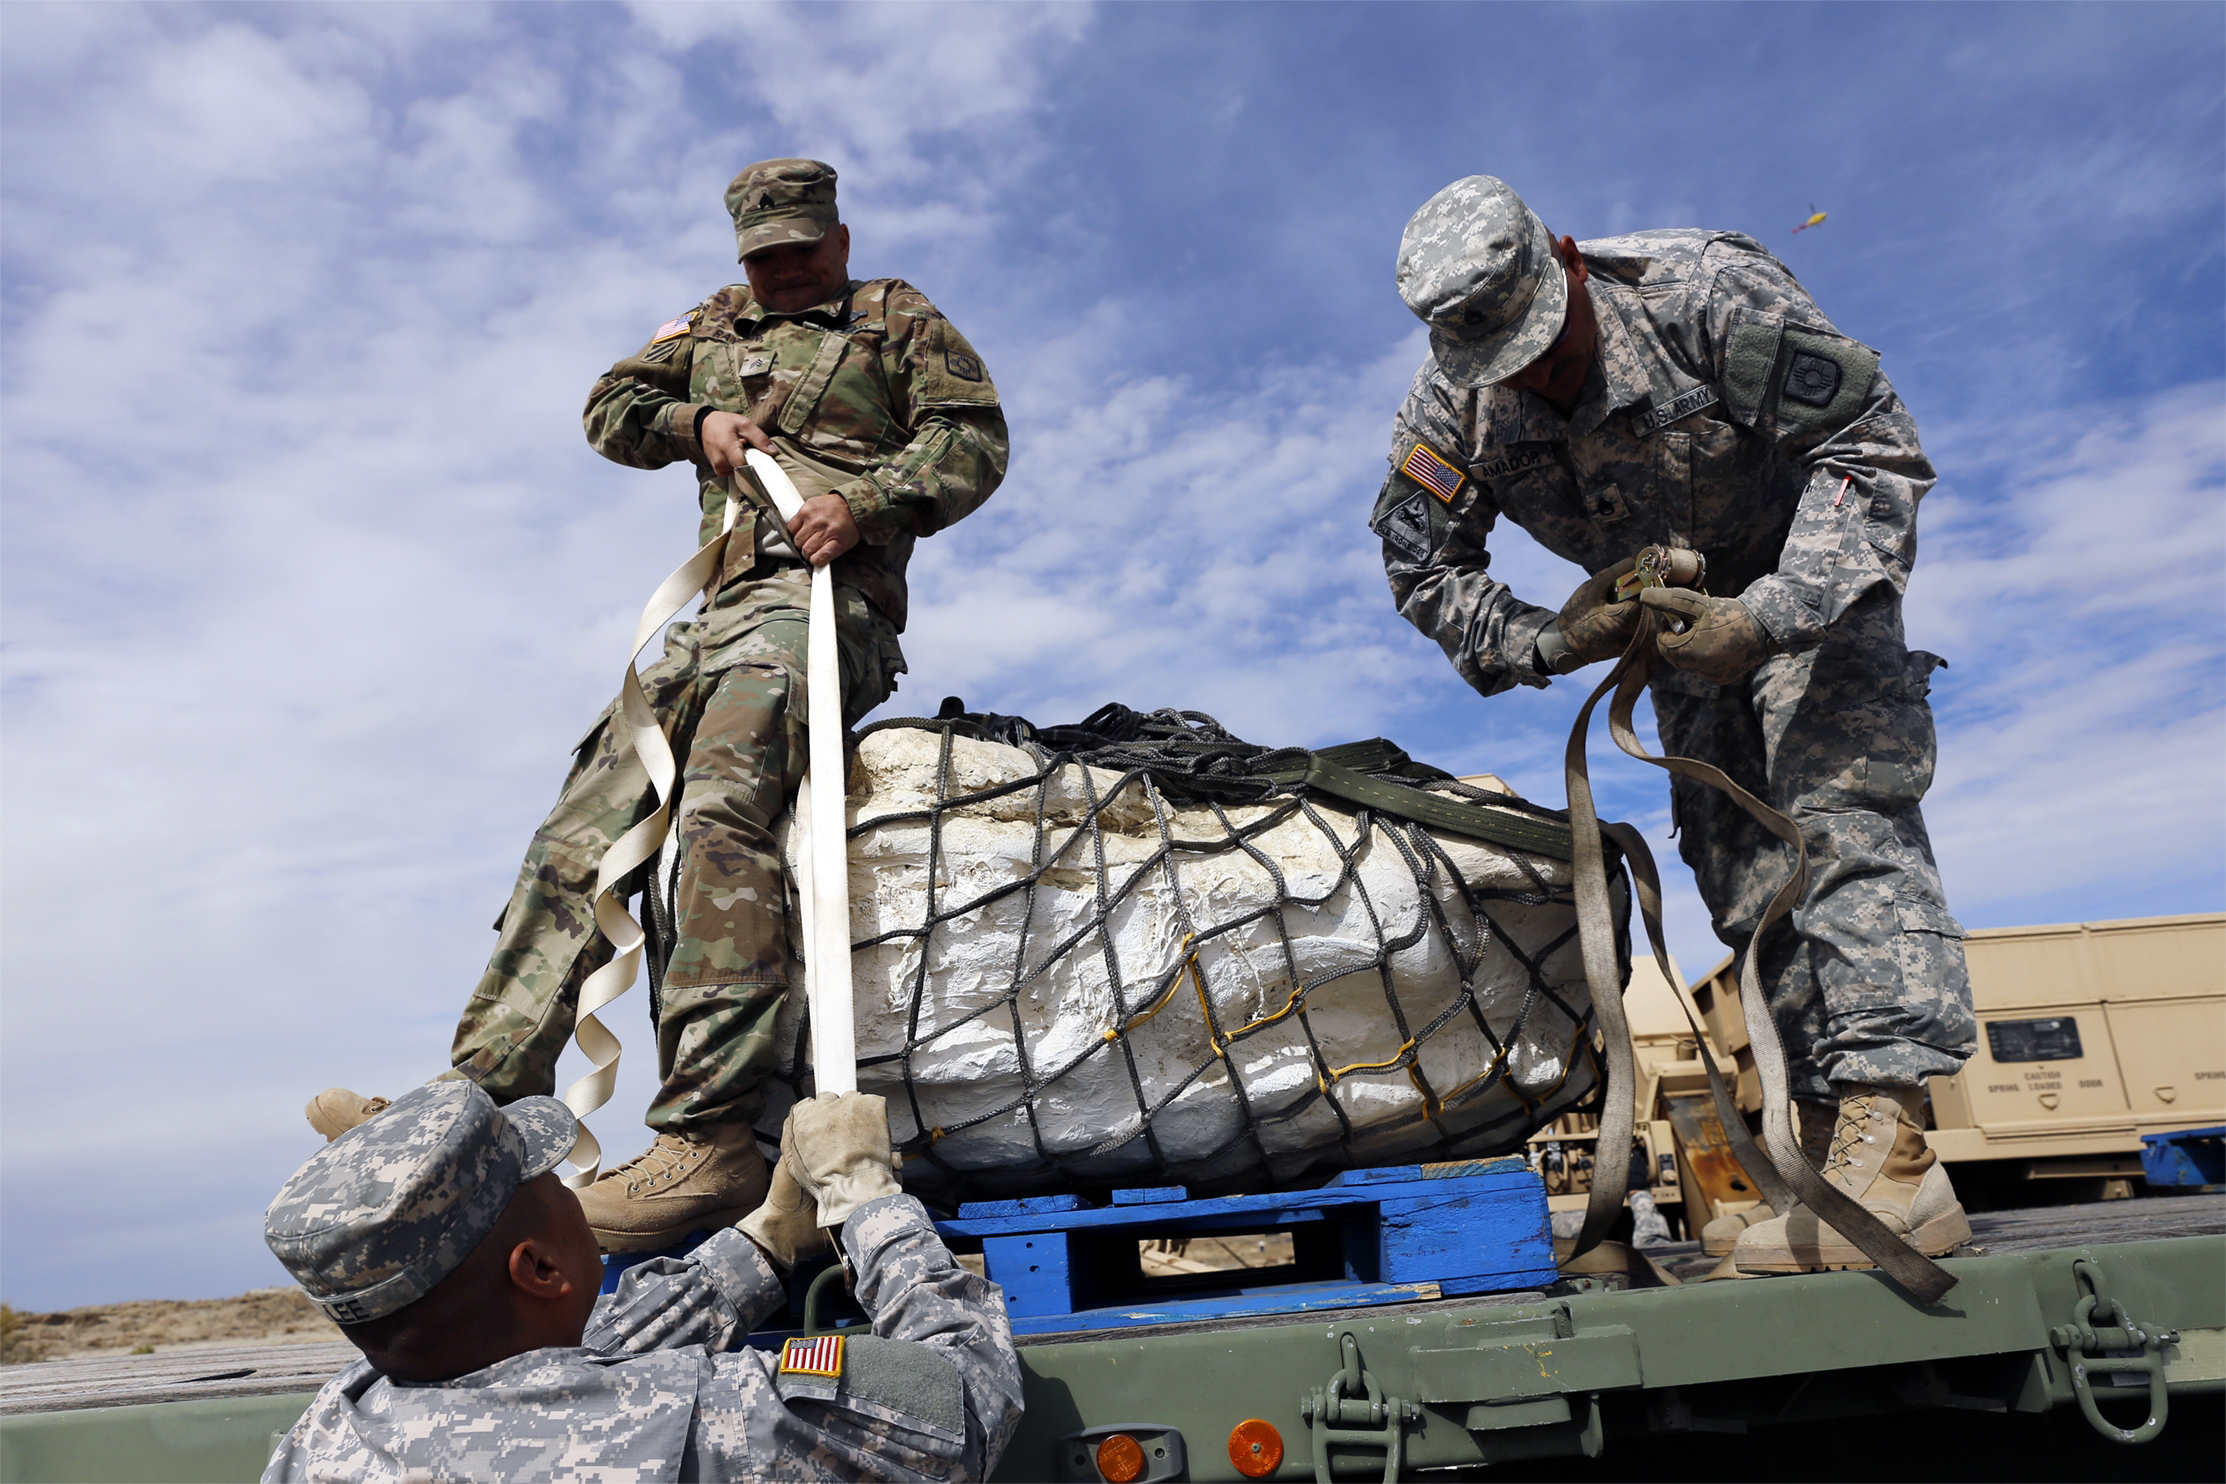 PHOTO:Sgt. 1st Class Terrill Lee, from left, Sgt. James Ray and Staff Sgt. Noe Amador, secure the remains of a Pentaceratops, Oct. 29, 2015, in the Bisti-De-Na-Zin Wilderness area south of Farmington, N.M.   